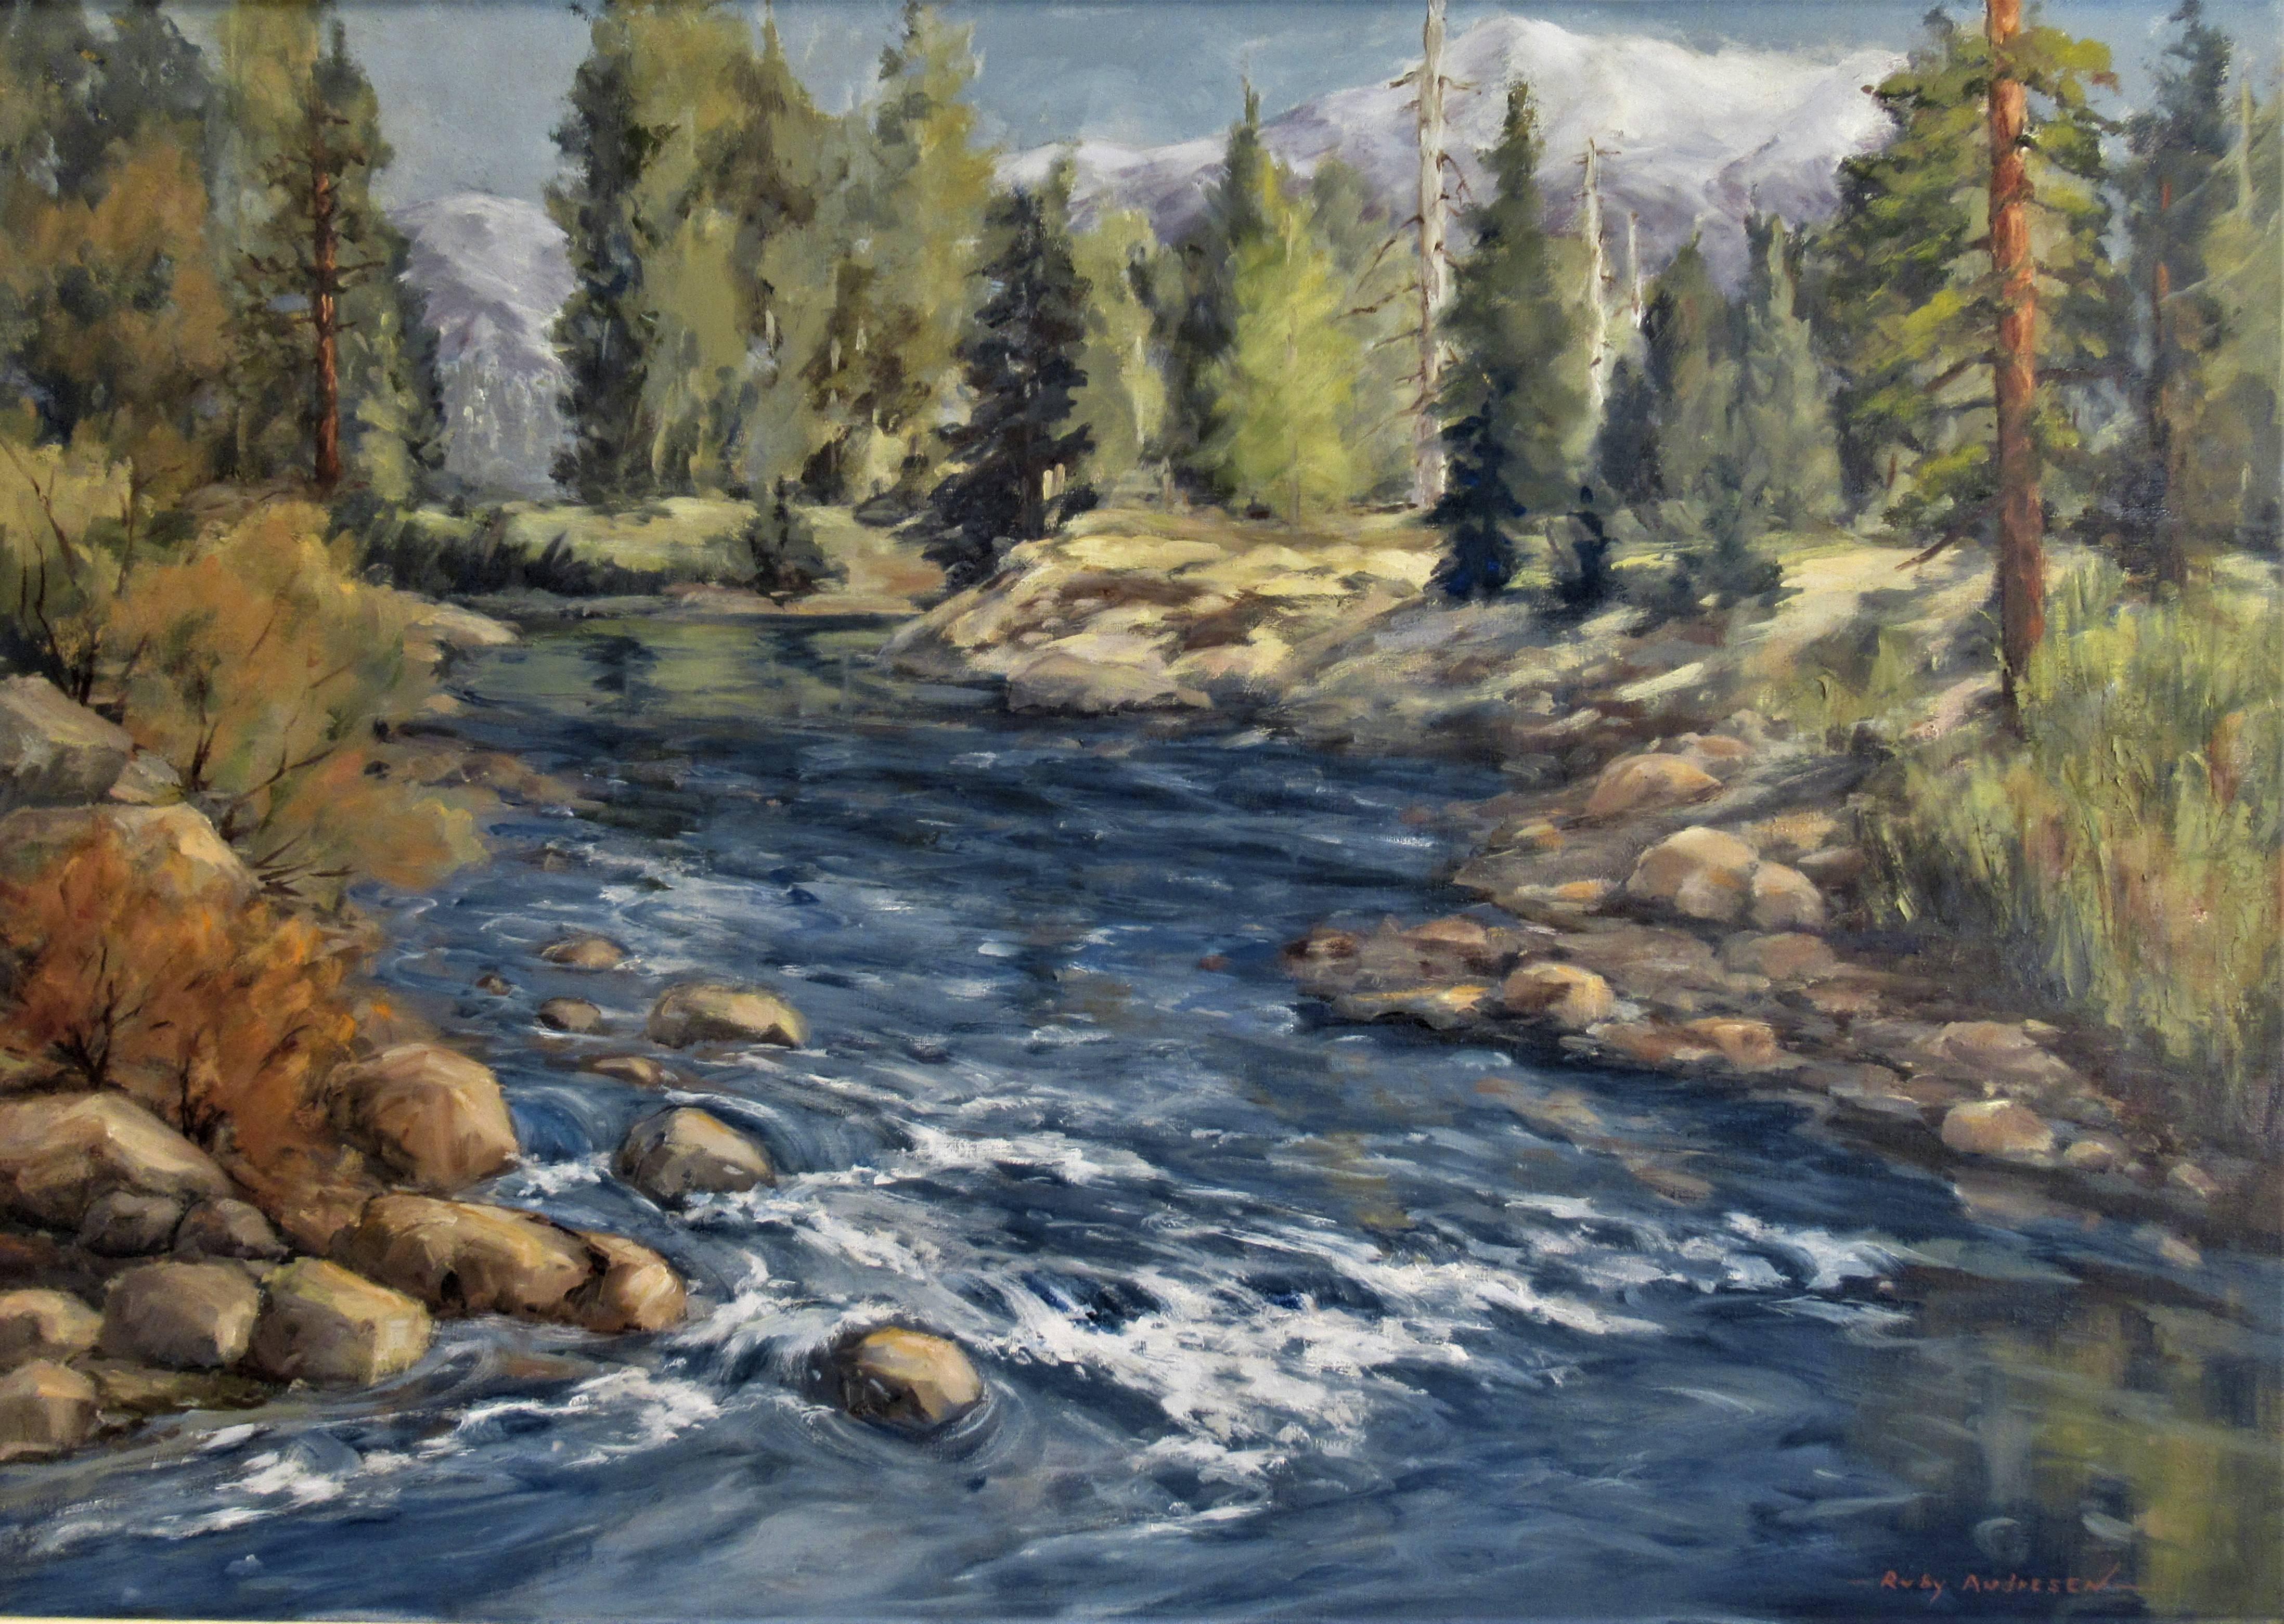 Califonia Landscape with River - Painting by Ruby Bernice Hultgren Andresen